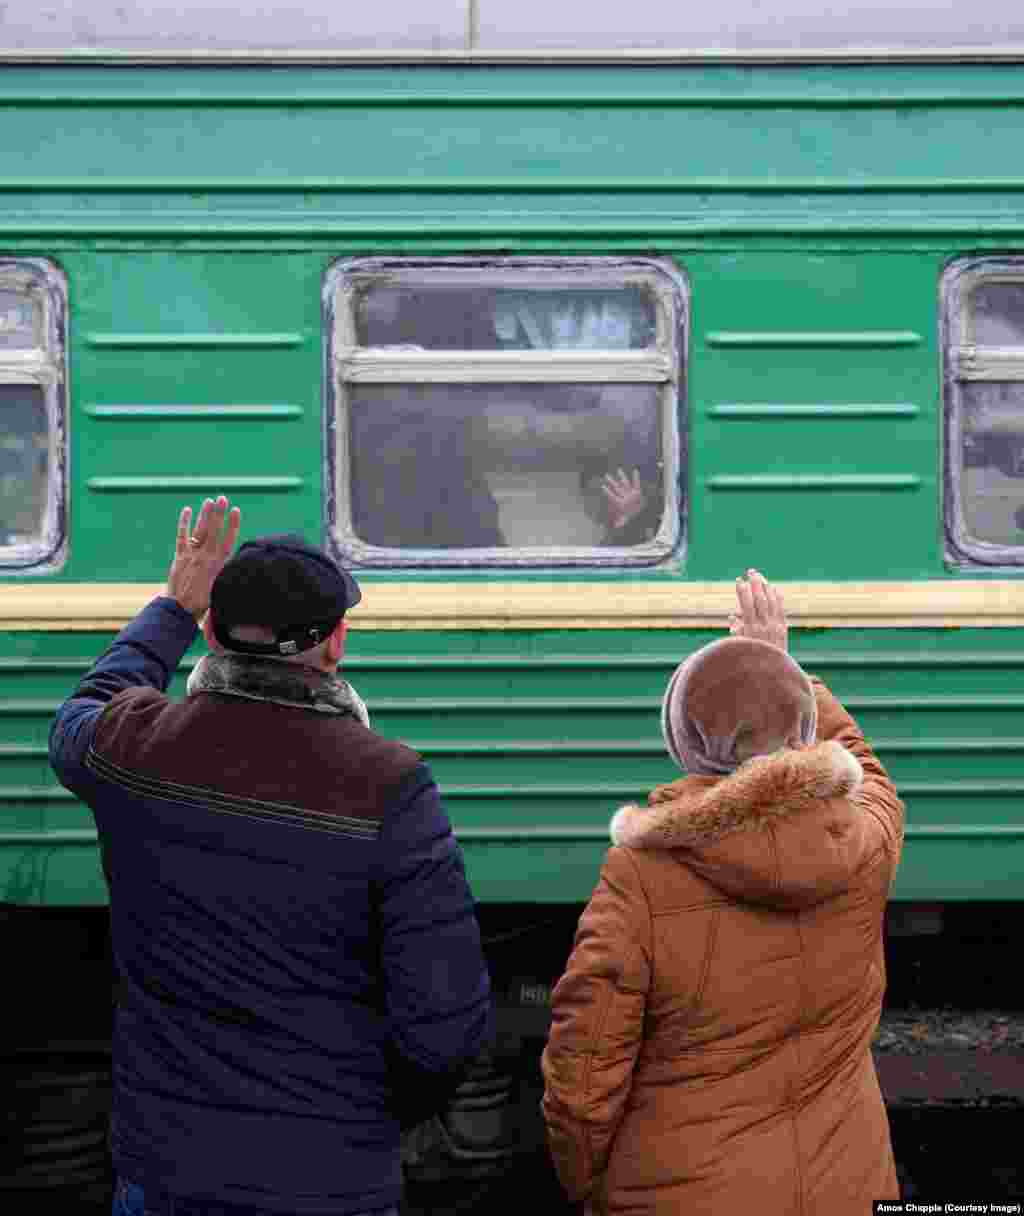 People wave goodbye to a friend from a station in southern Russia. A platzkart bed for an overnight Moscow-St. Petersburg trip sells for around $20 &ndash; less than most hotels.